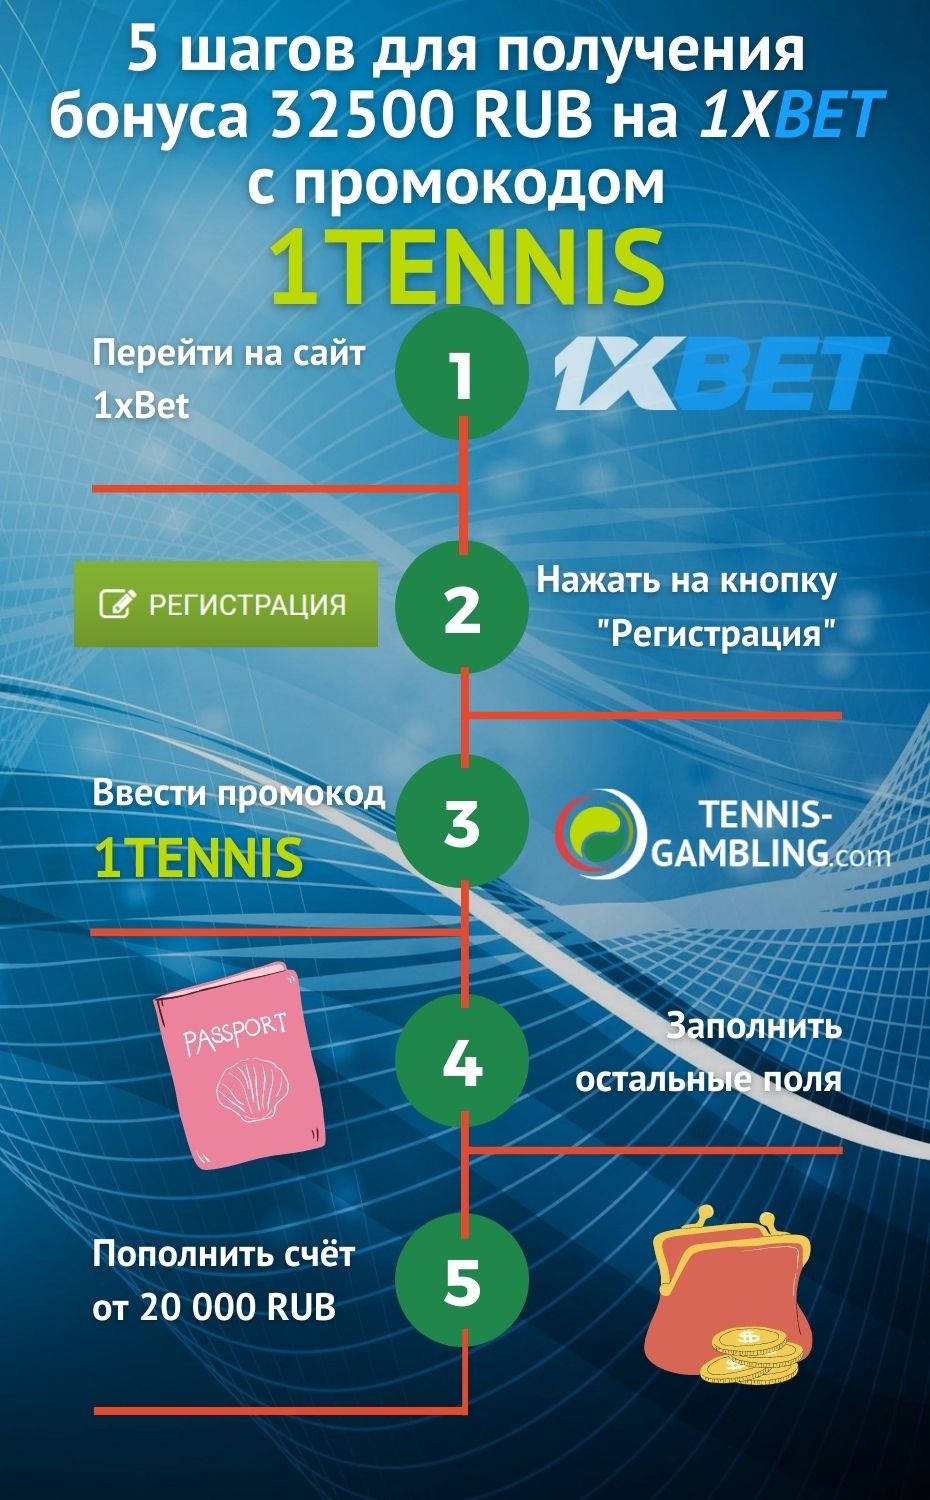 In 10 Minutes, I'll Give You The Truth About 1xbet зеркало промокод